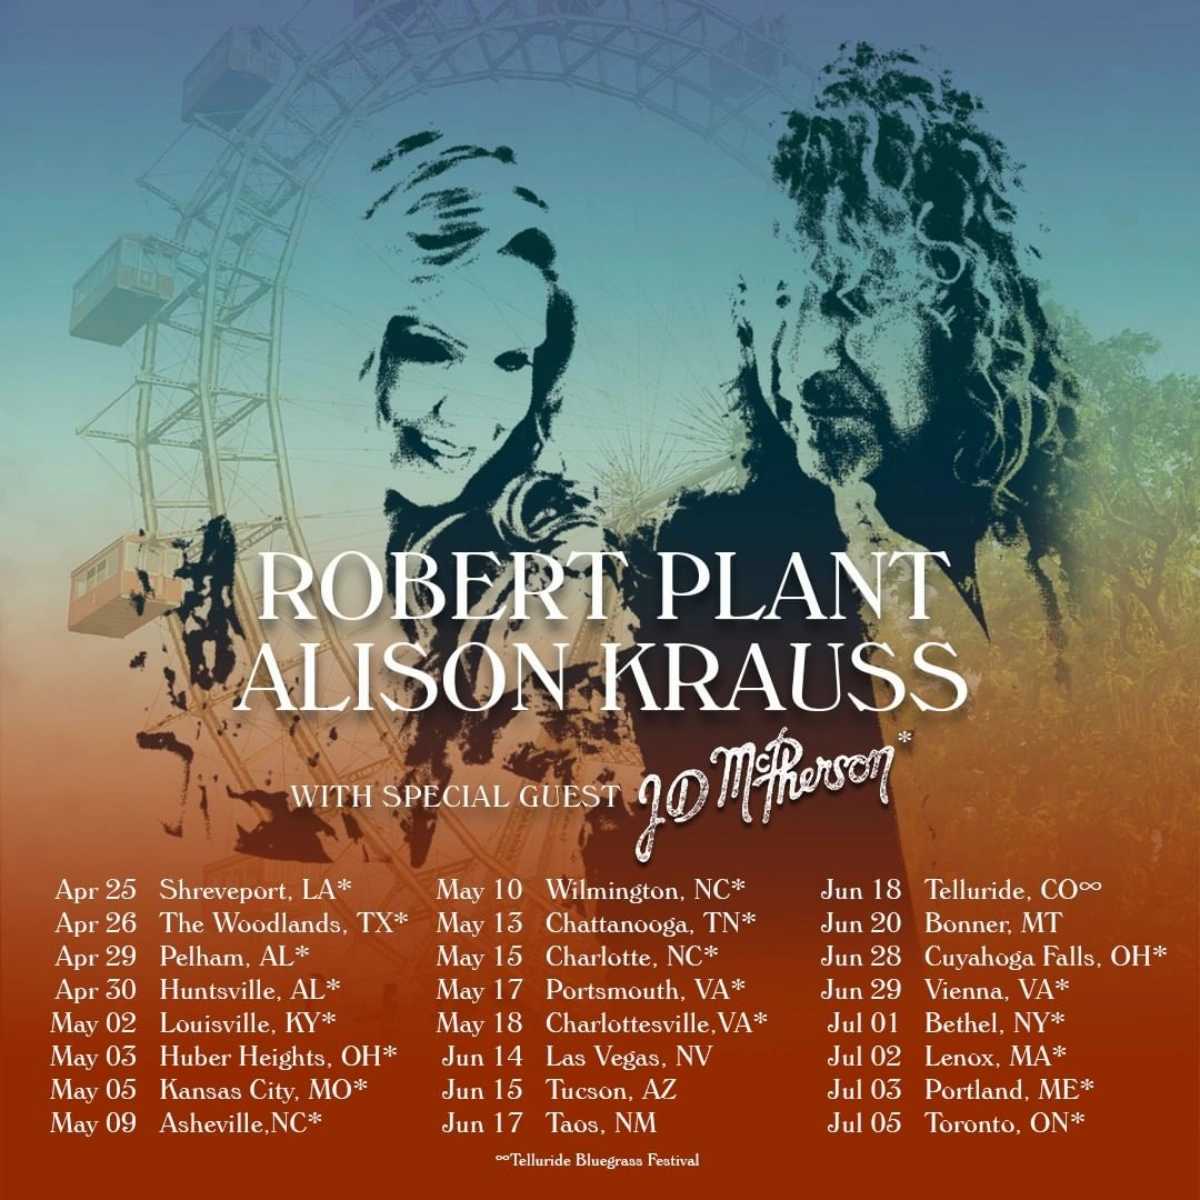 Robert Plant and Alison Krauss US tour dates for 2023